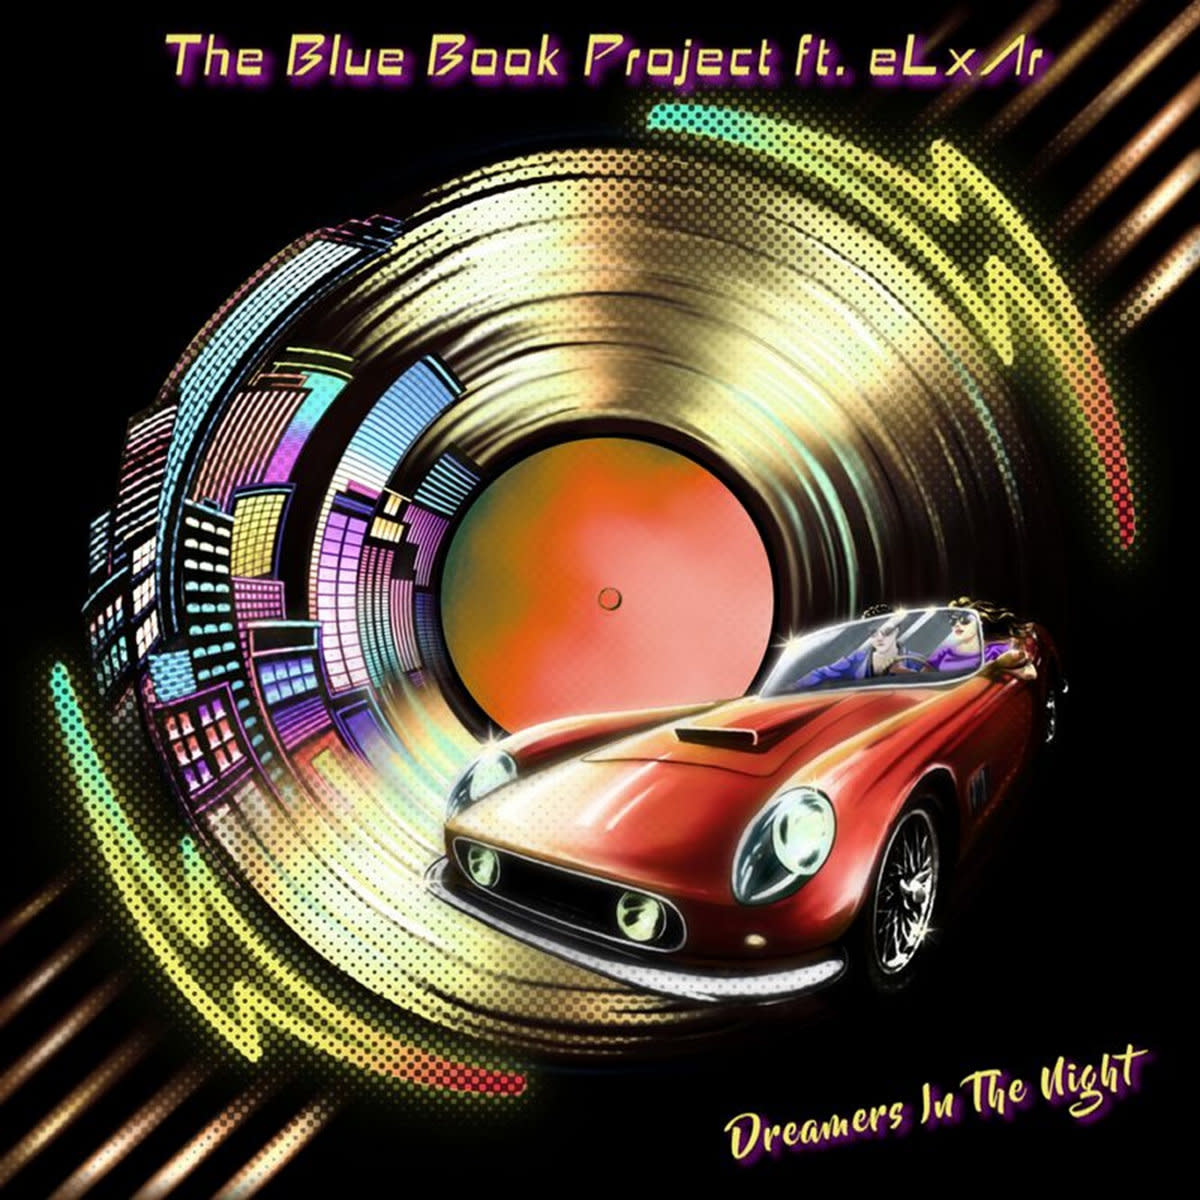 Synth Single Review: “Dreamers In The Night’’ by The Blue Book Project & eLxAr